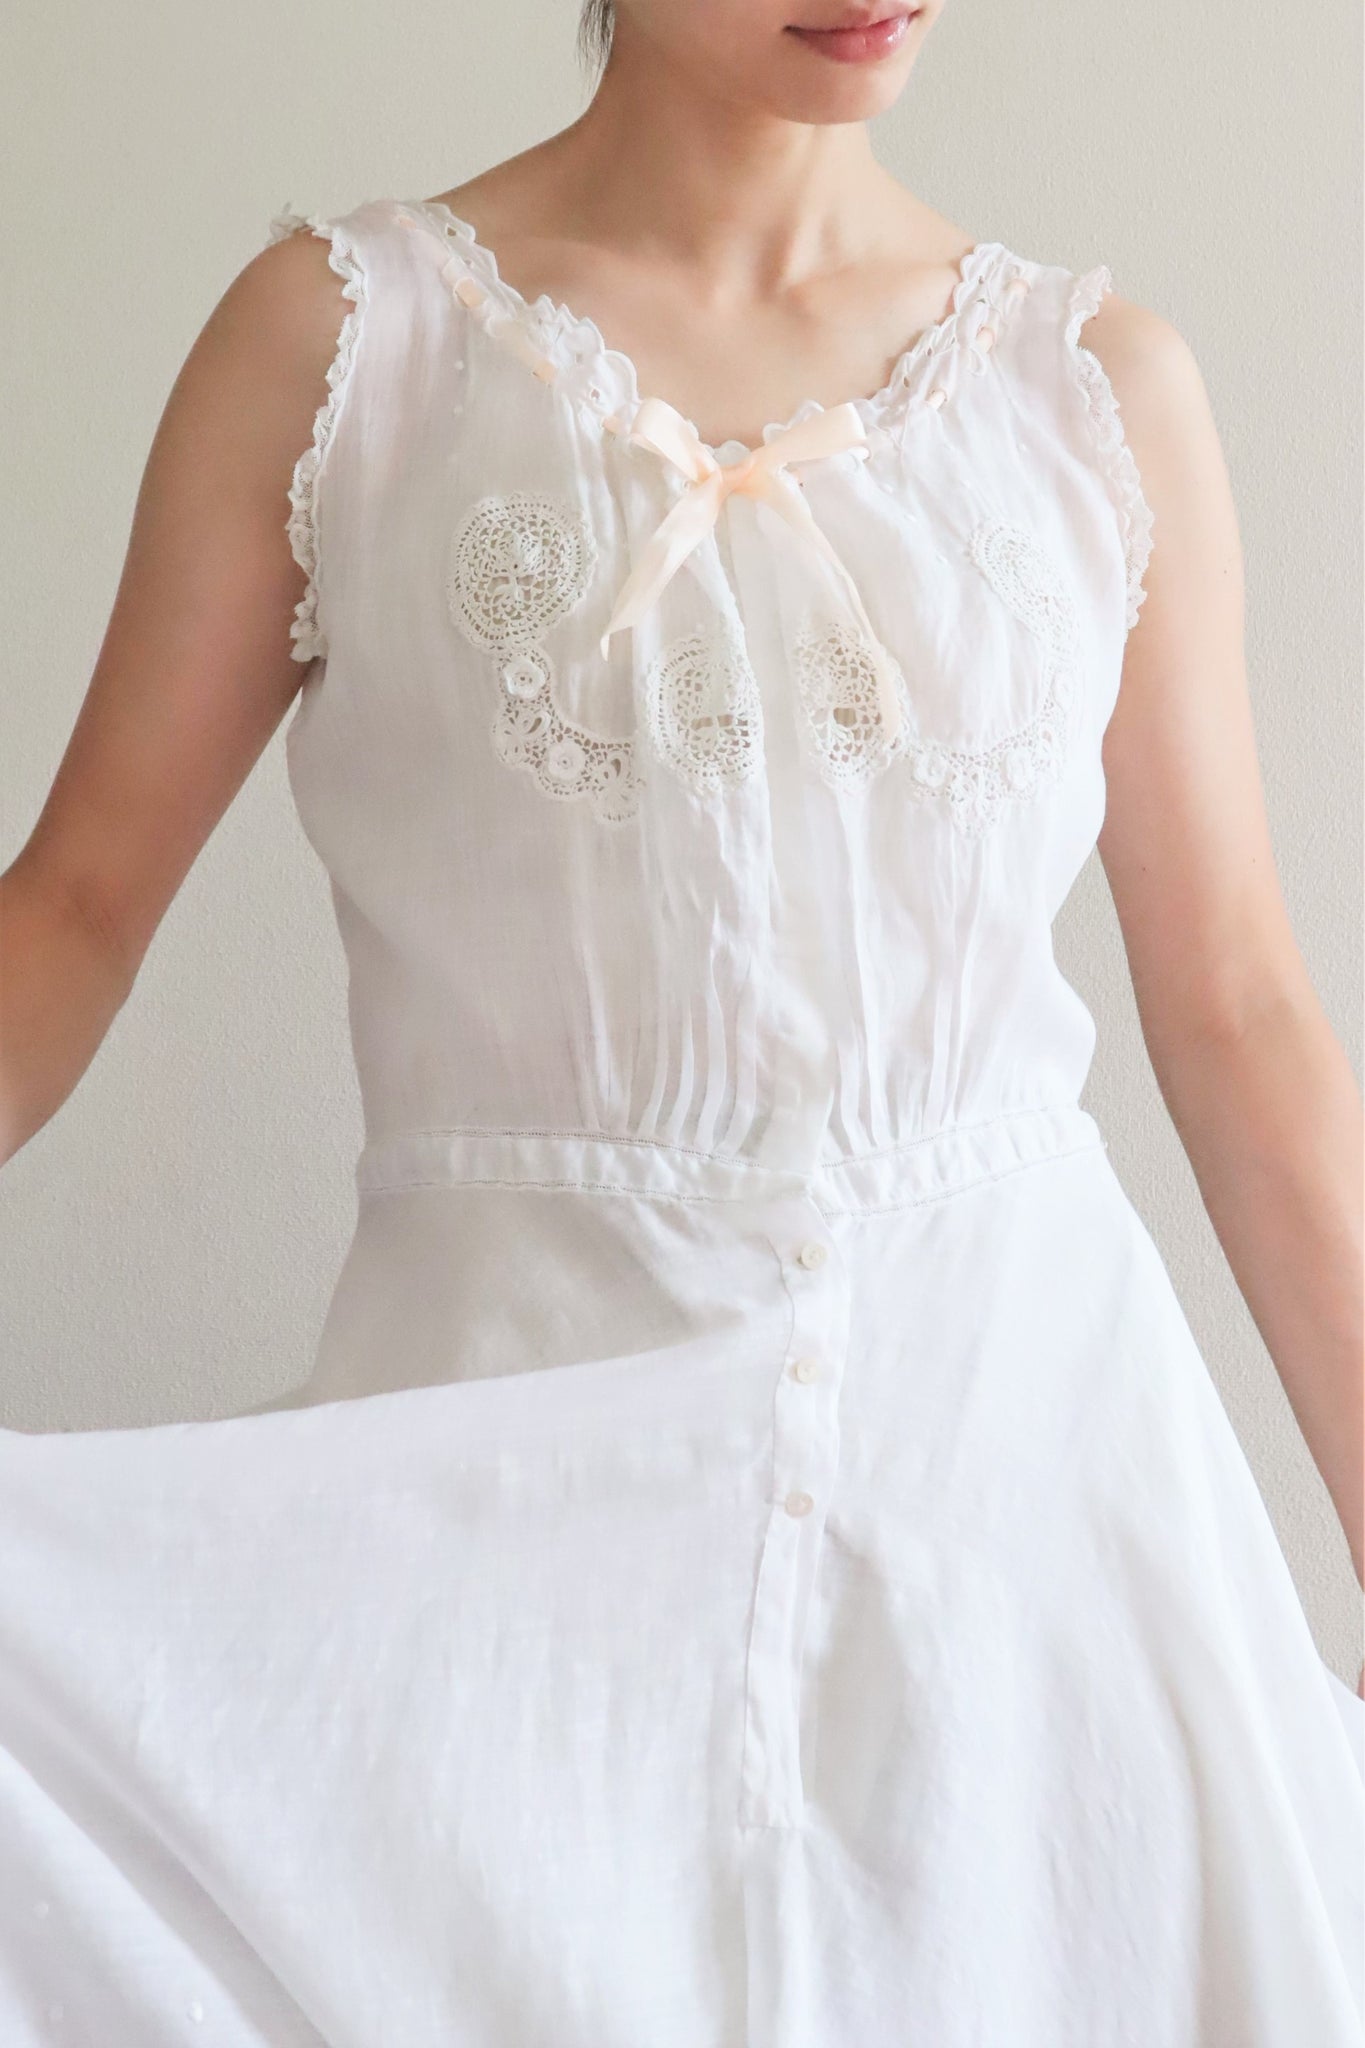 1900s Edwardian Hand Embroidered White Lawn Cotton Romper